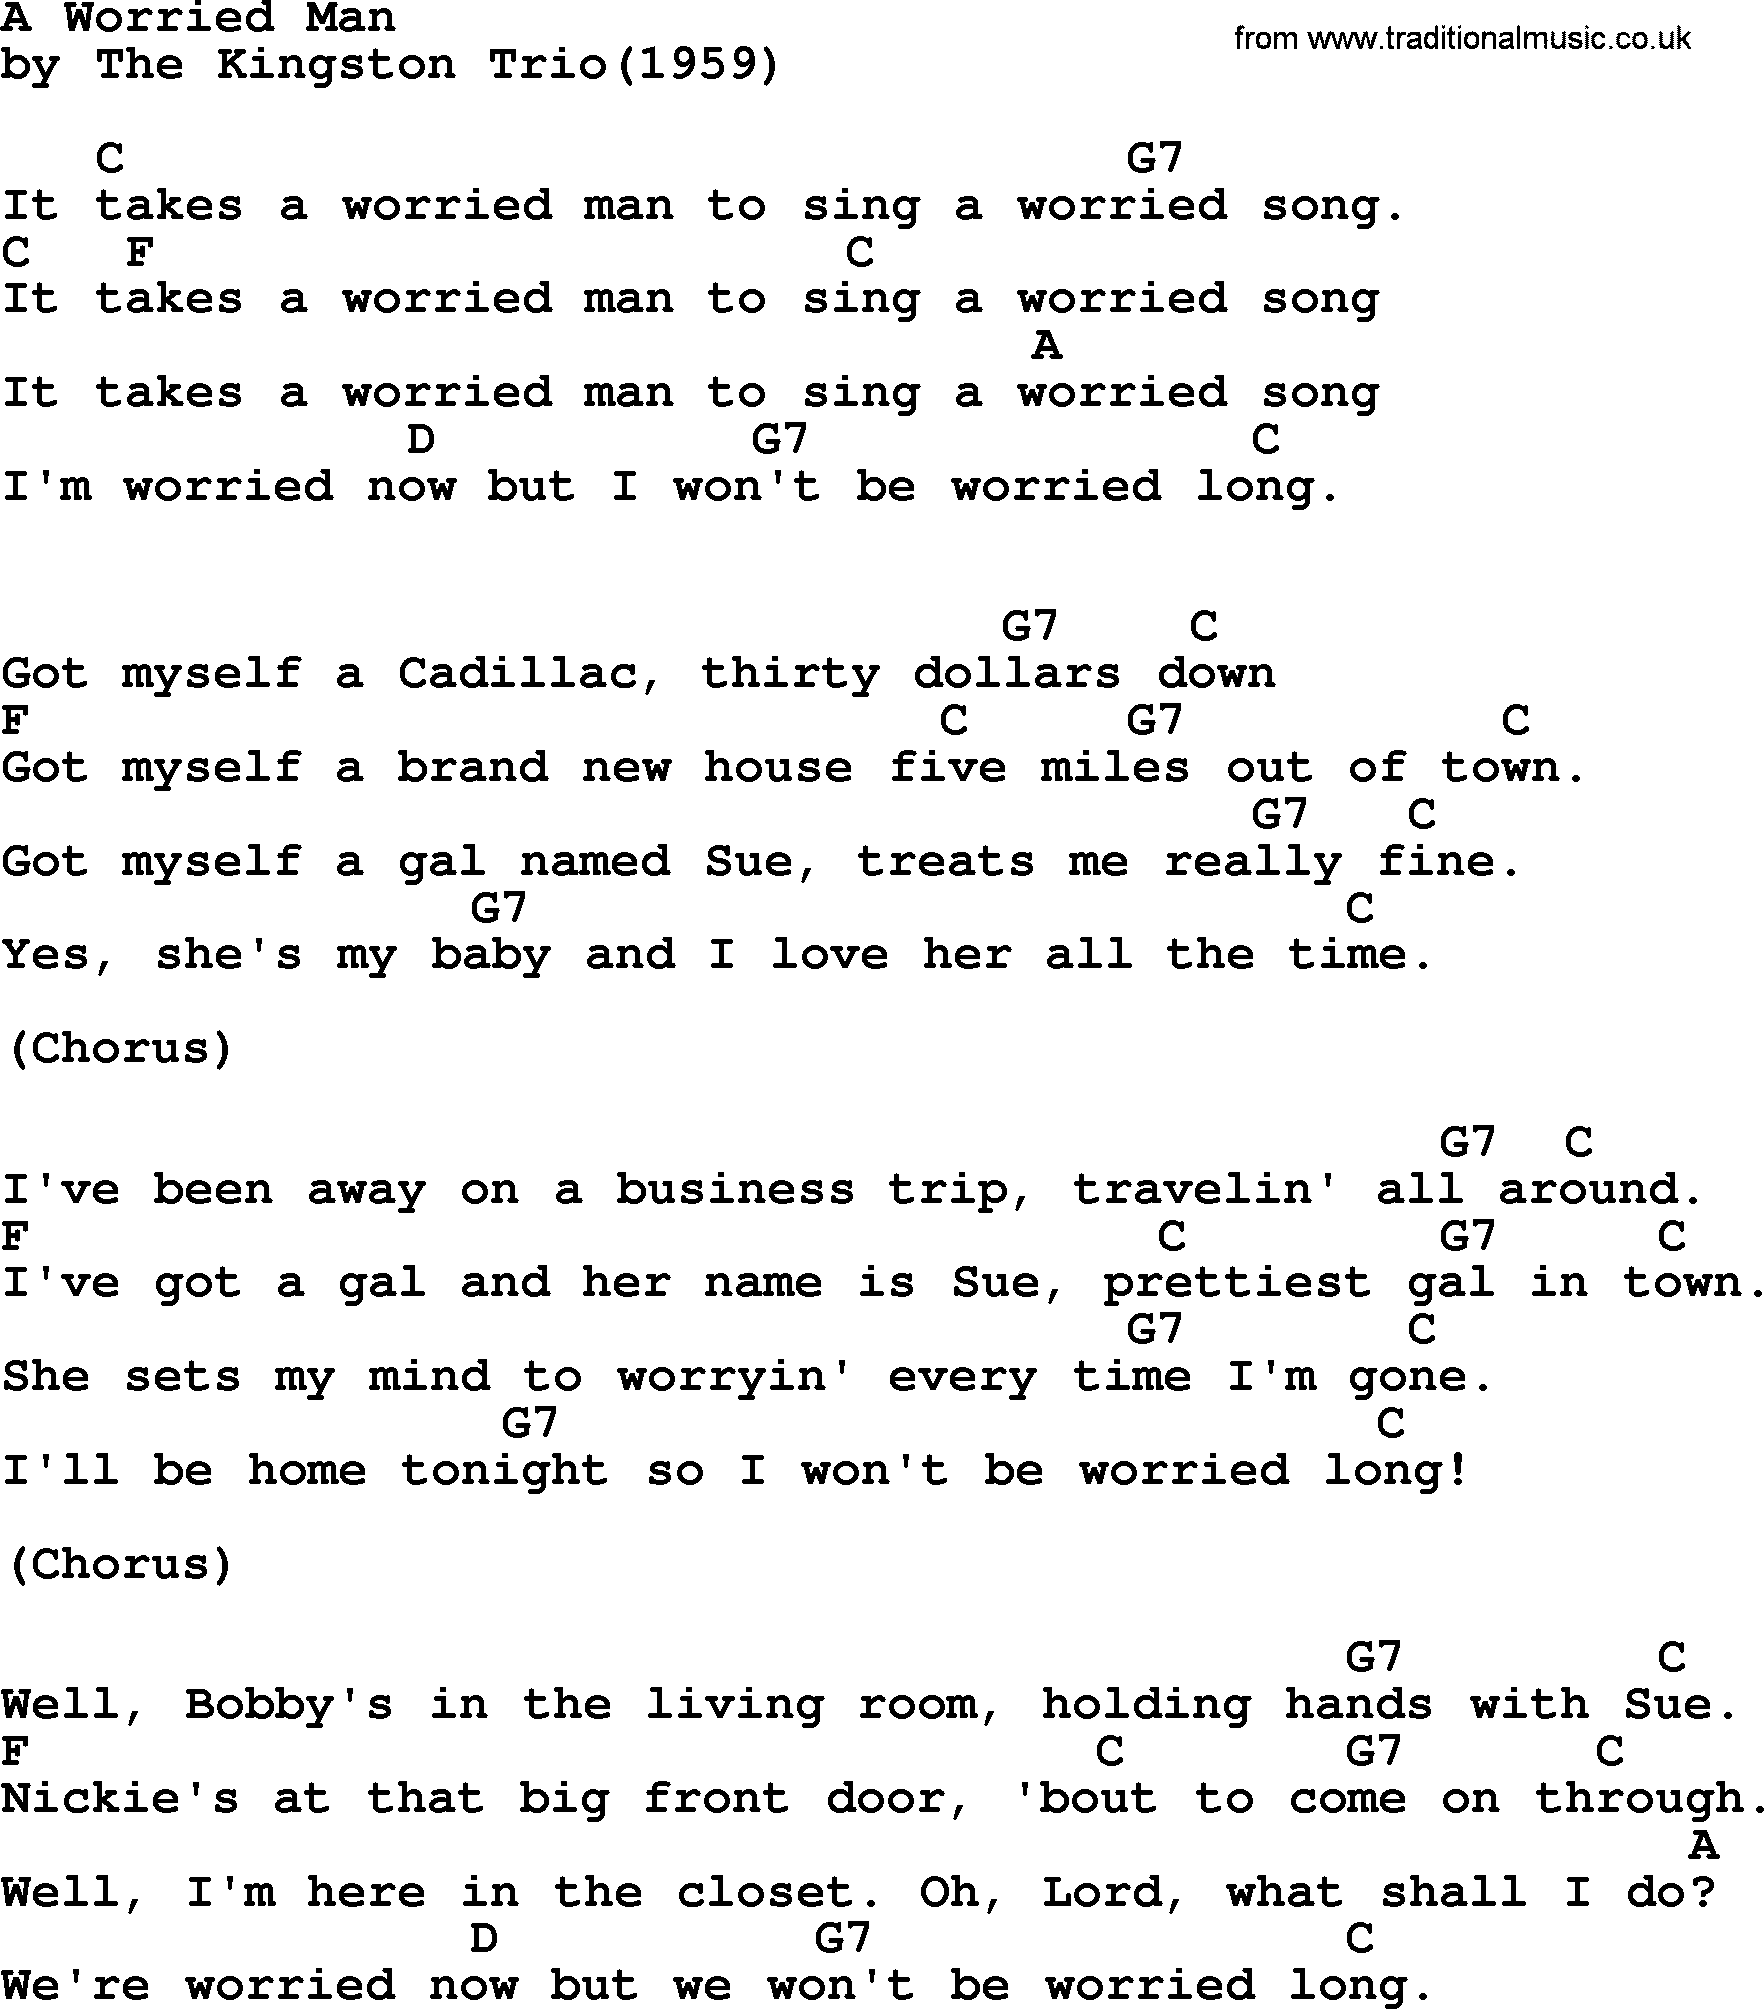 Kingston Trio song A Worried Man, lyrics and chords